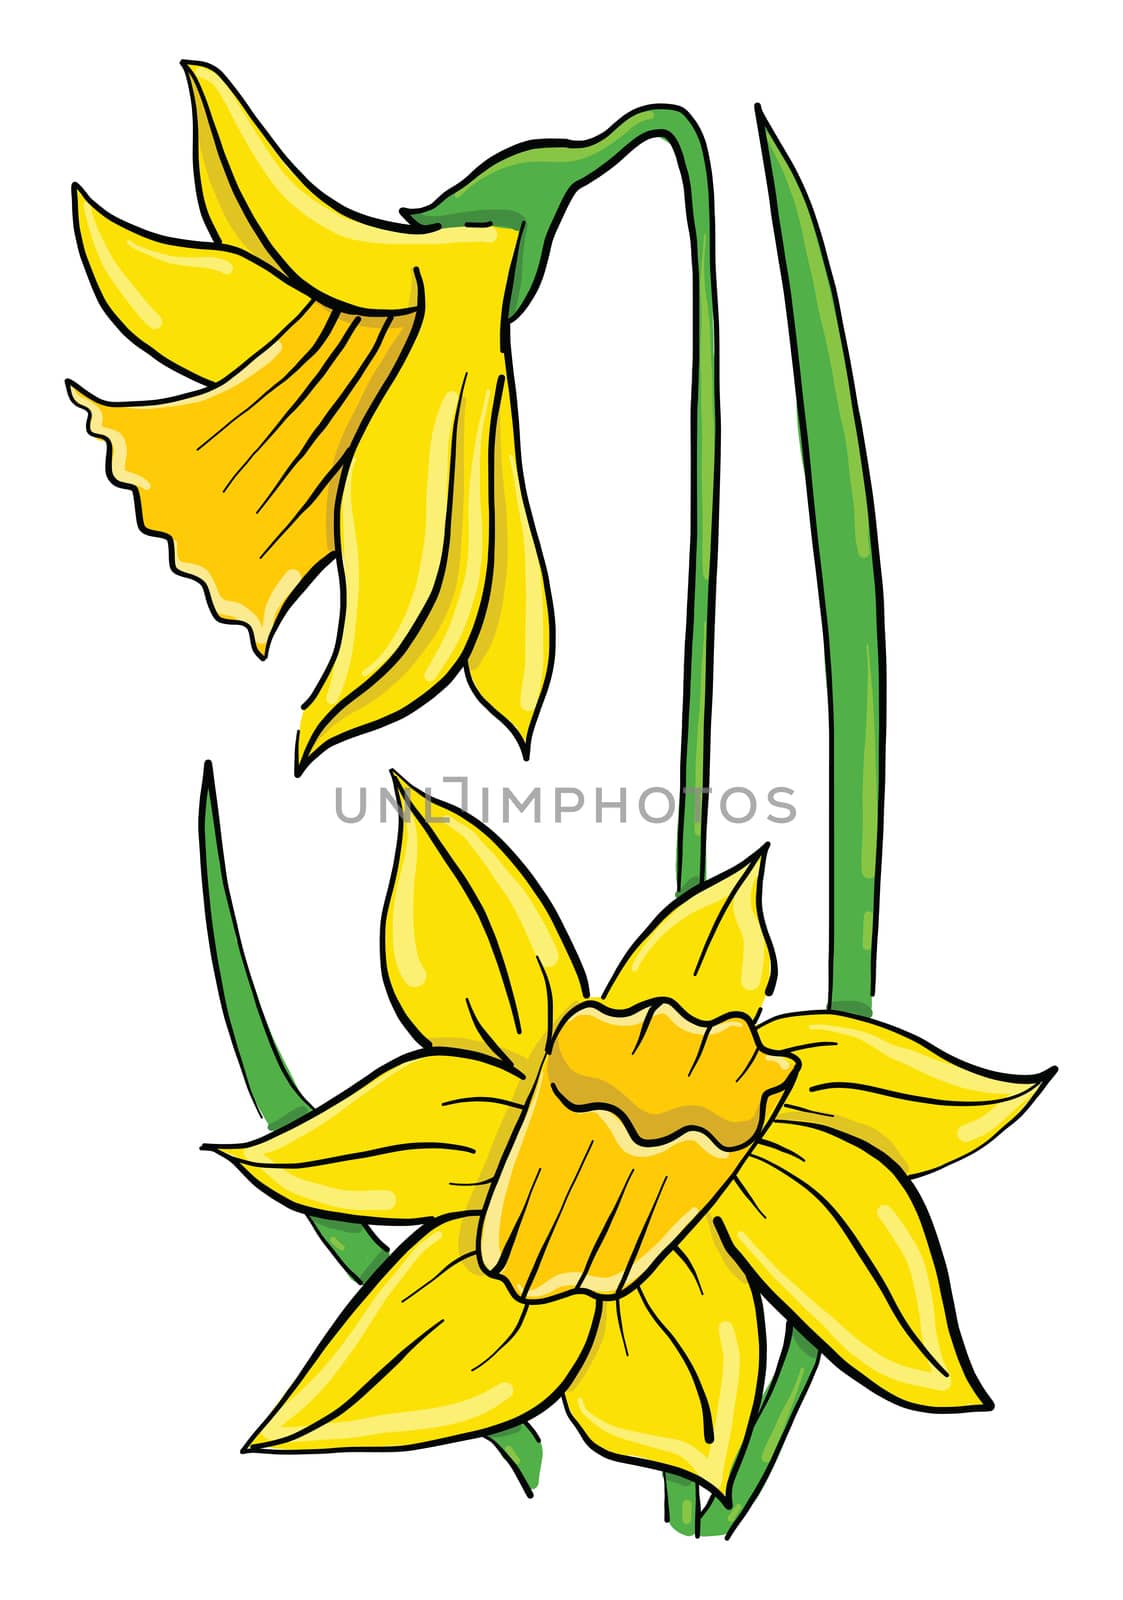 Yellow daffodil , illustration, vector on white background